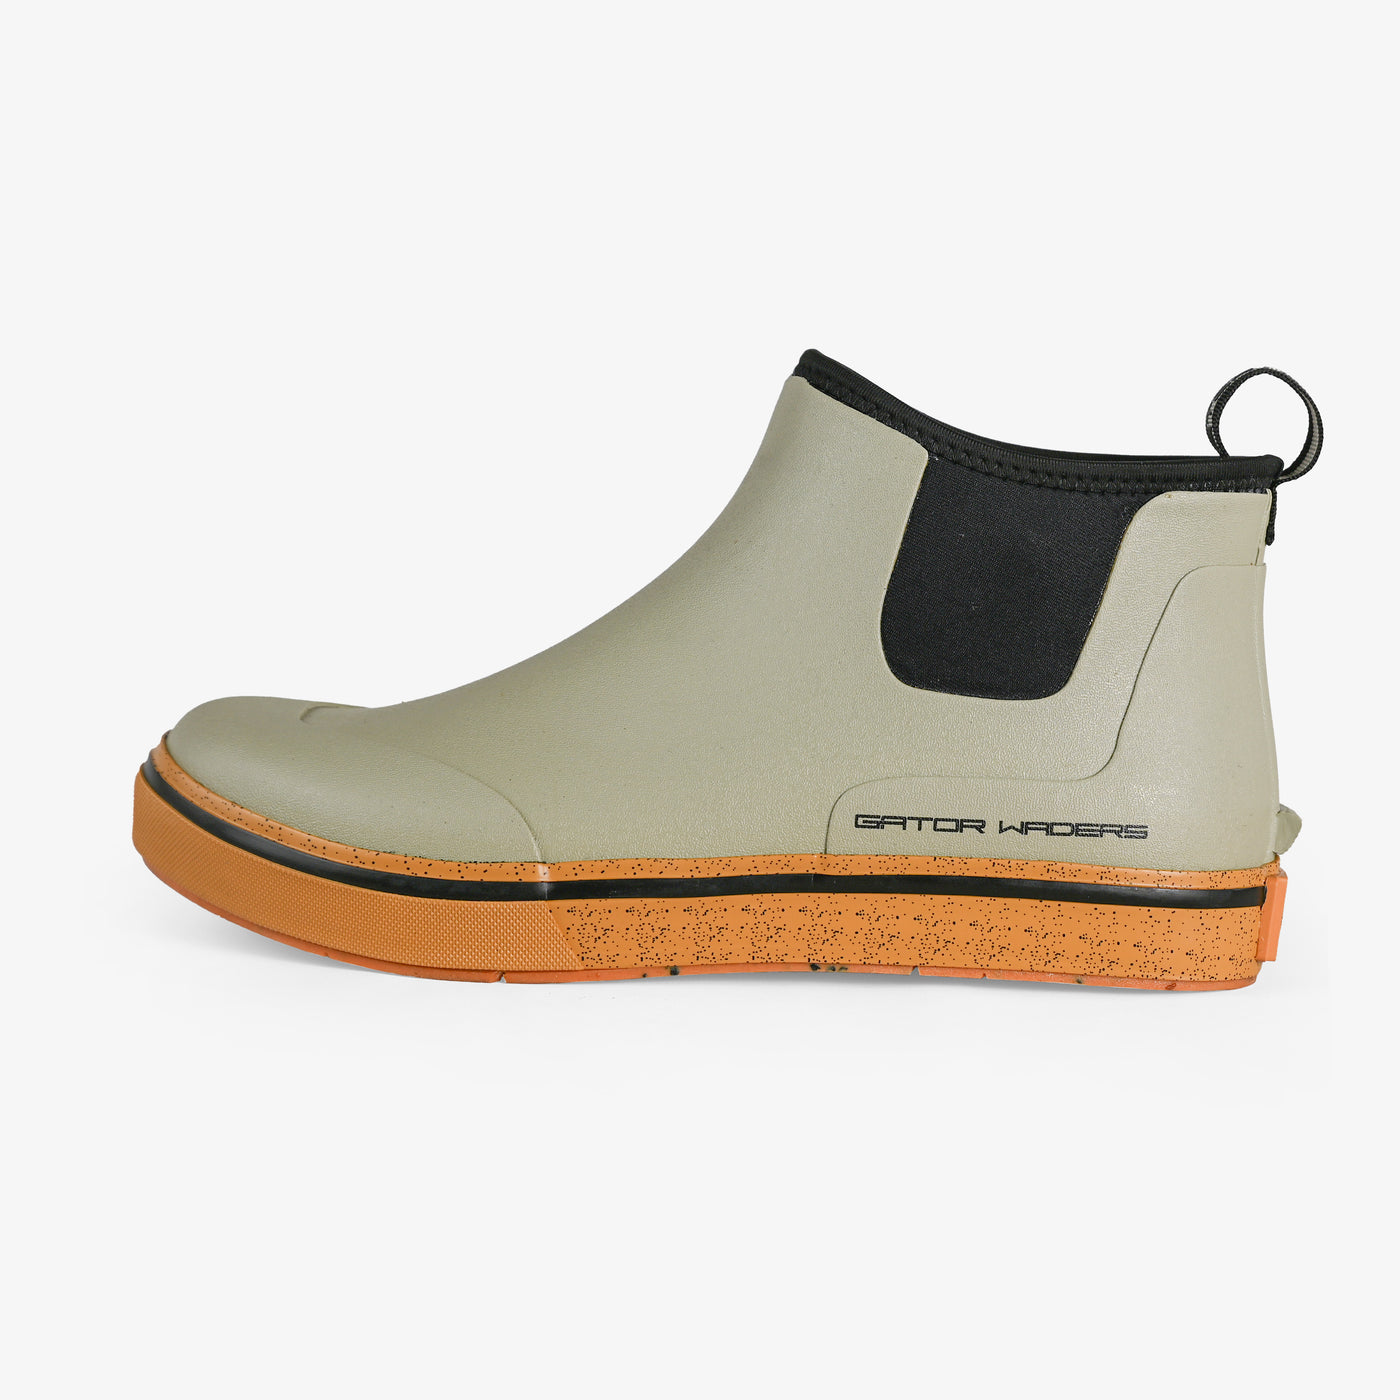 Camp Boots - Mens - Gravel - outside View